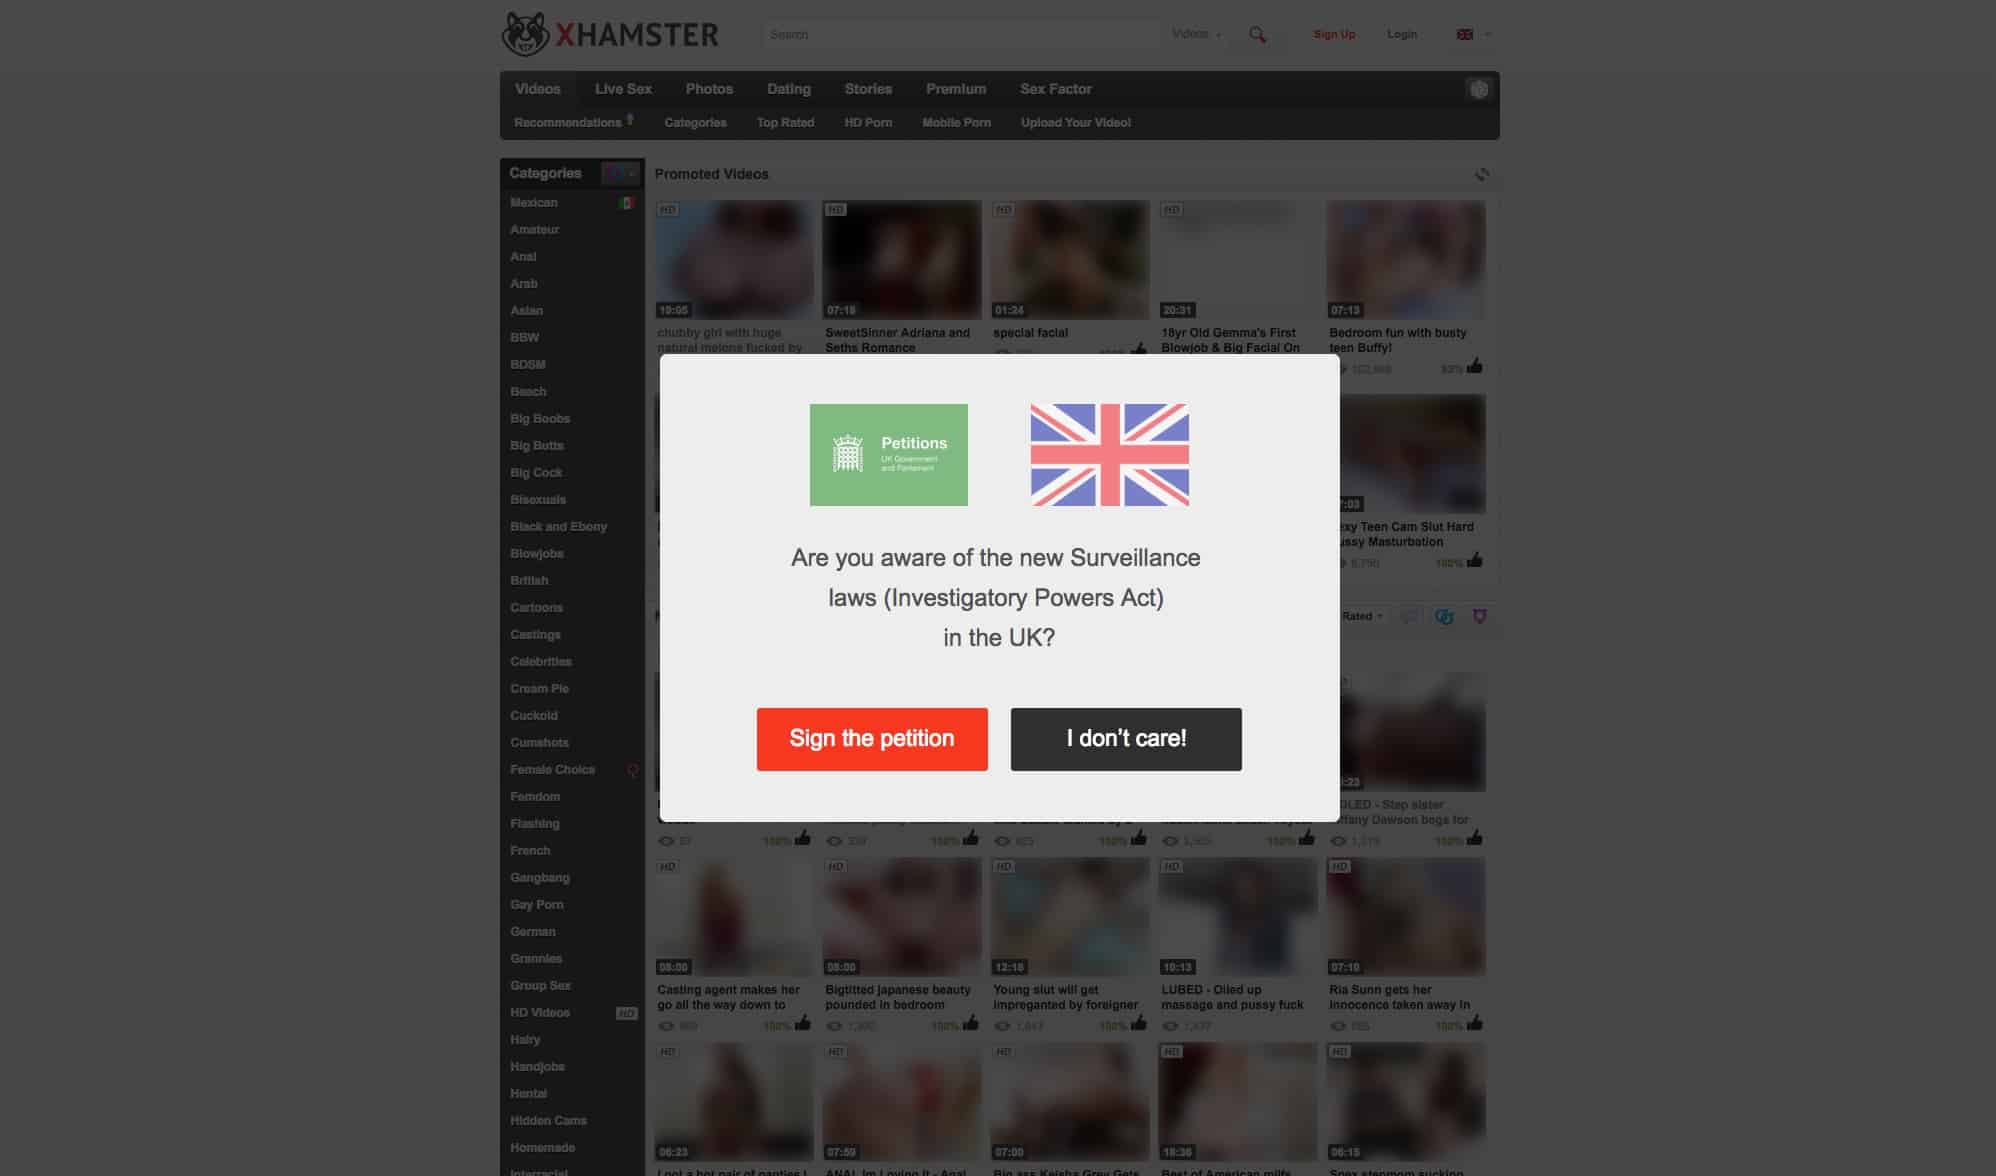 A British dating website screenshot featuring xHamster's advocacy to repeal the Investigatory Powers Act.